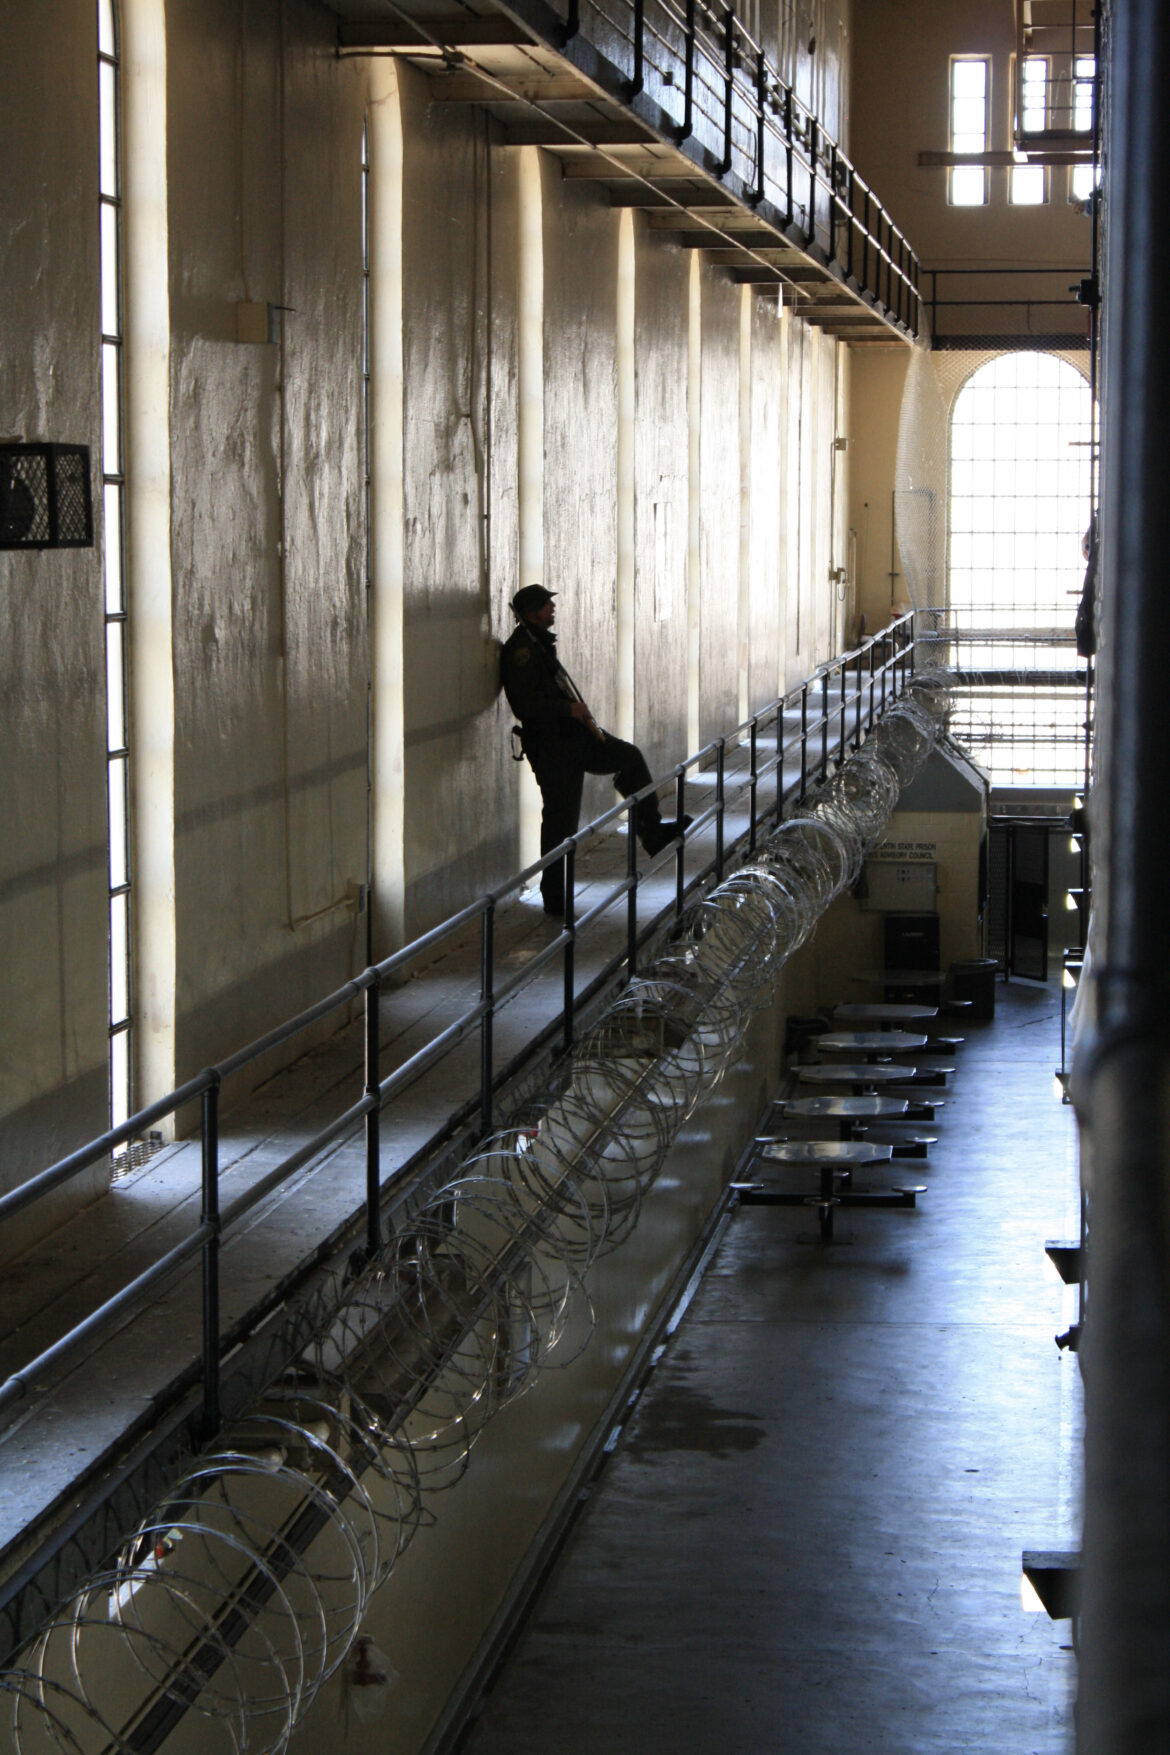 A prison guard stands inside a hall at San Quentin State Prison, his leg up on a railing fortified with razor wire, overlooking the ground floor.